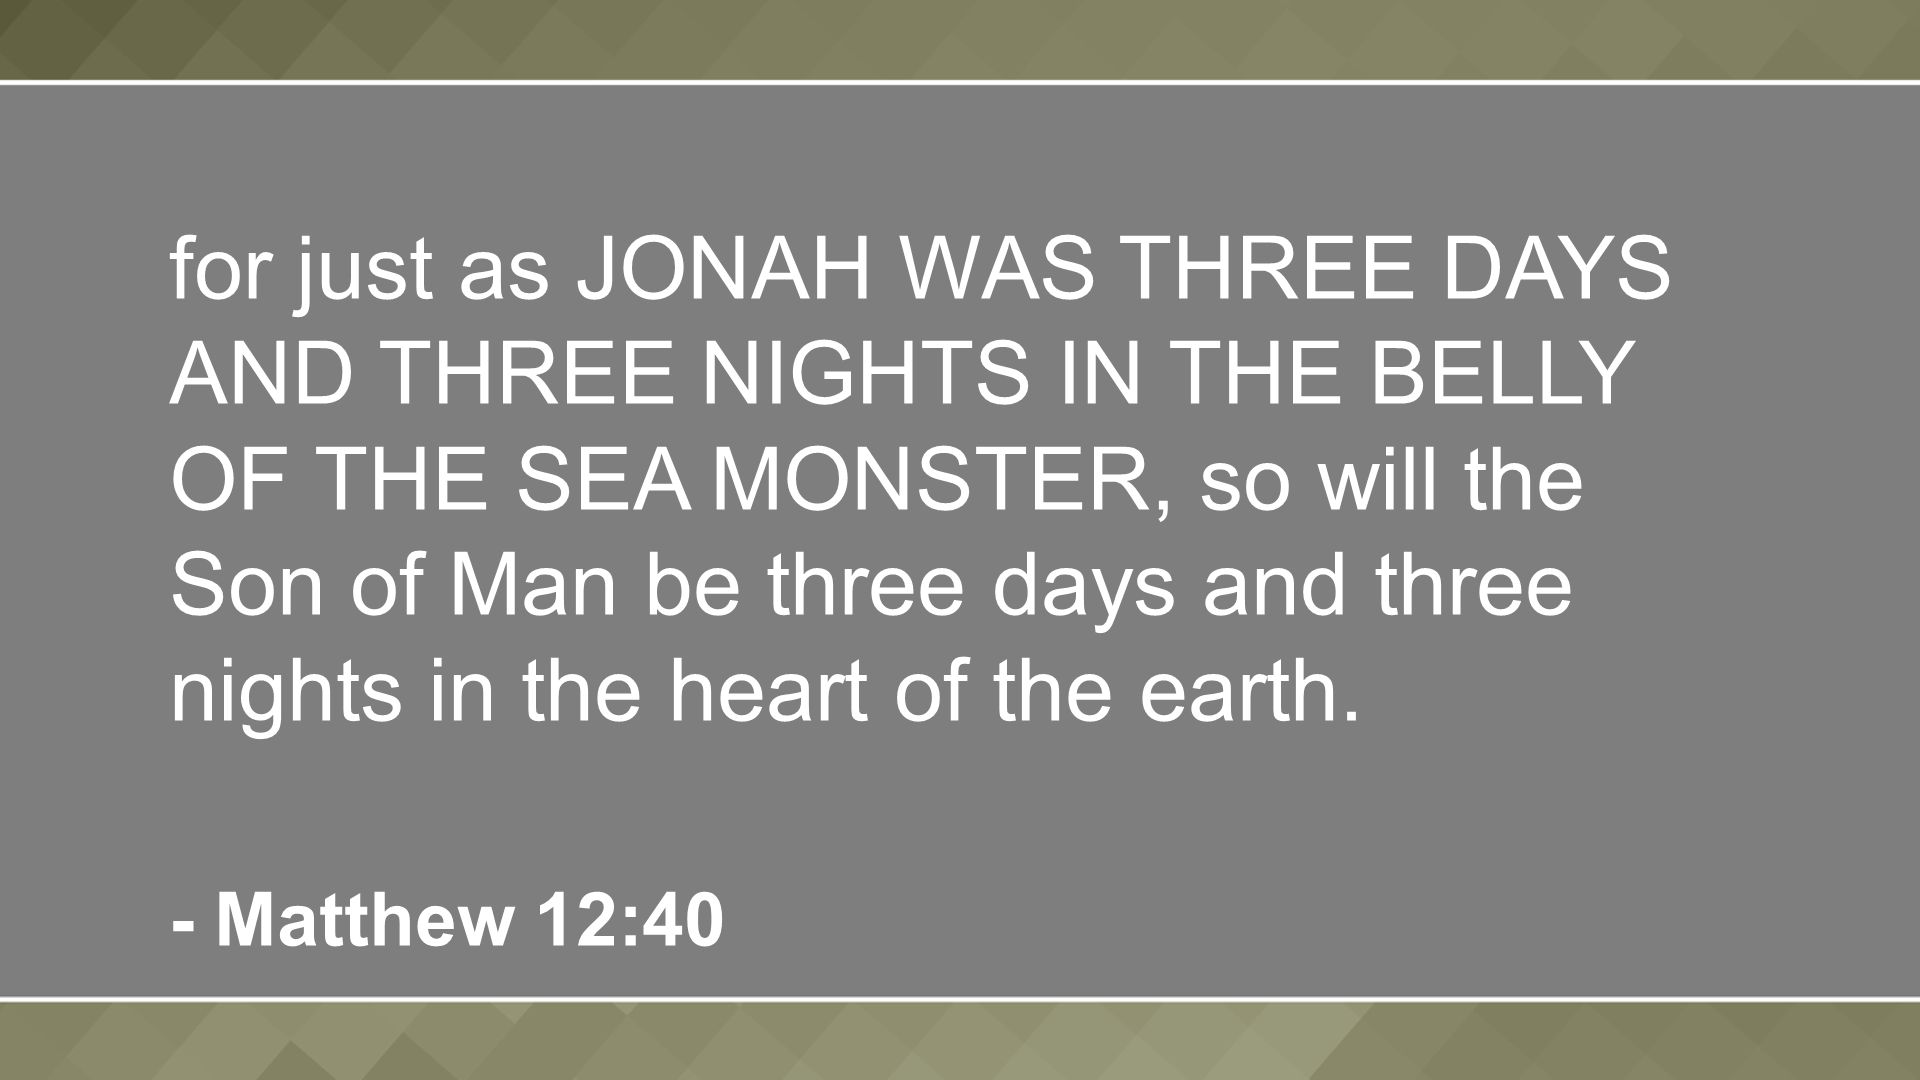 for just as JONAH WAS THREE DAYS AND THREE NIGHTS IN THE BELLY OF THE SEA MONSTER, so will the Son of Man be three days and three nights in the heart of the earth.